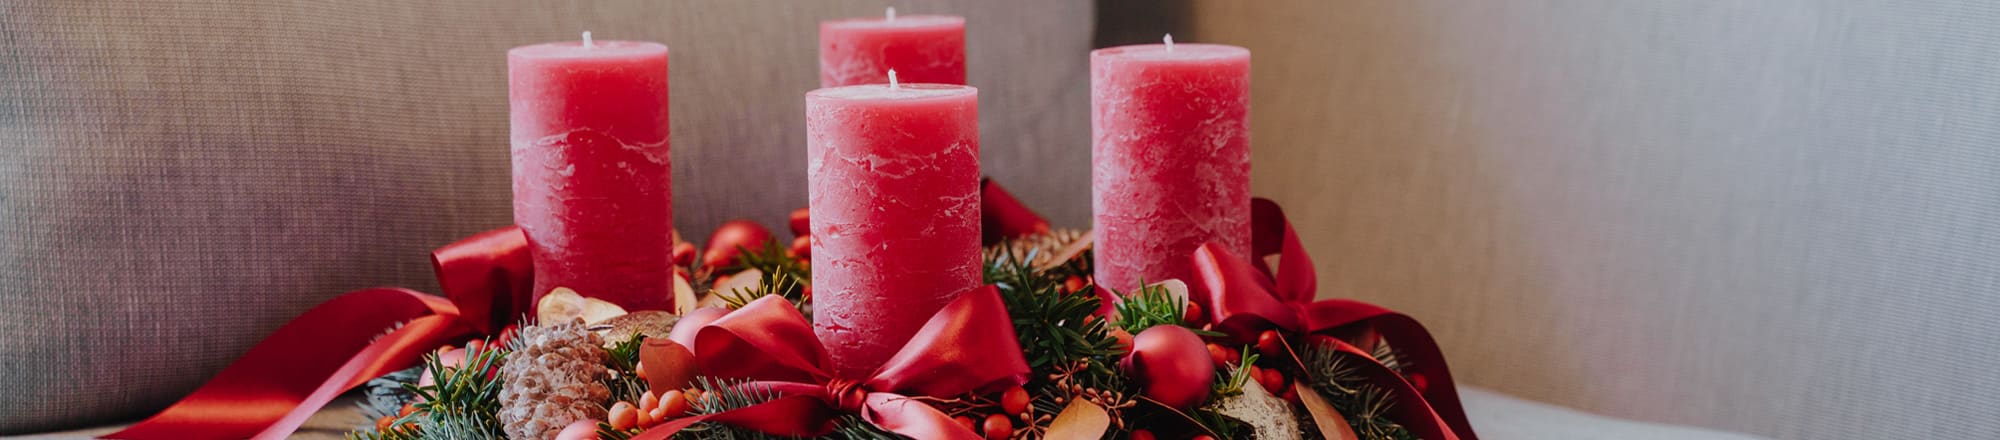 Care tips for Advent wreaths & candles